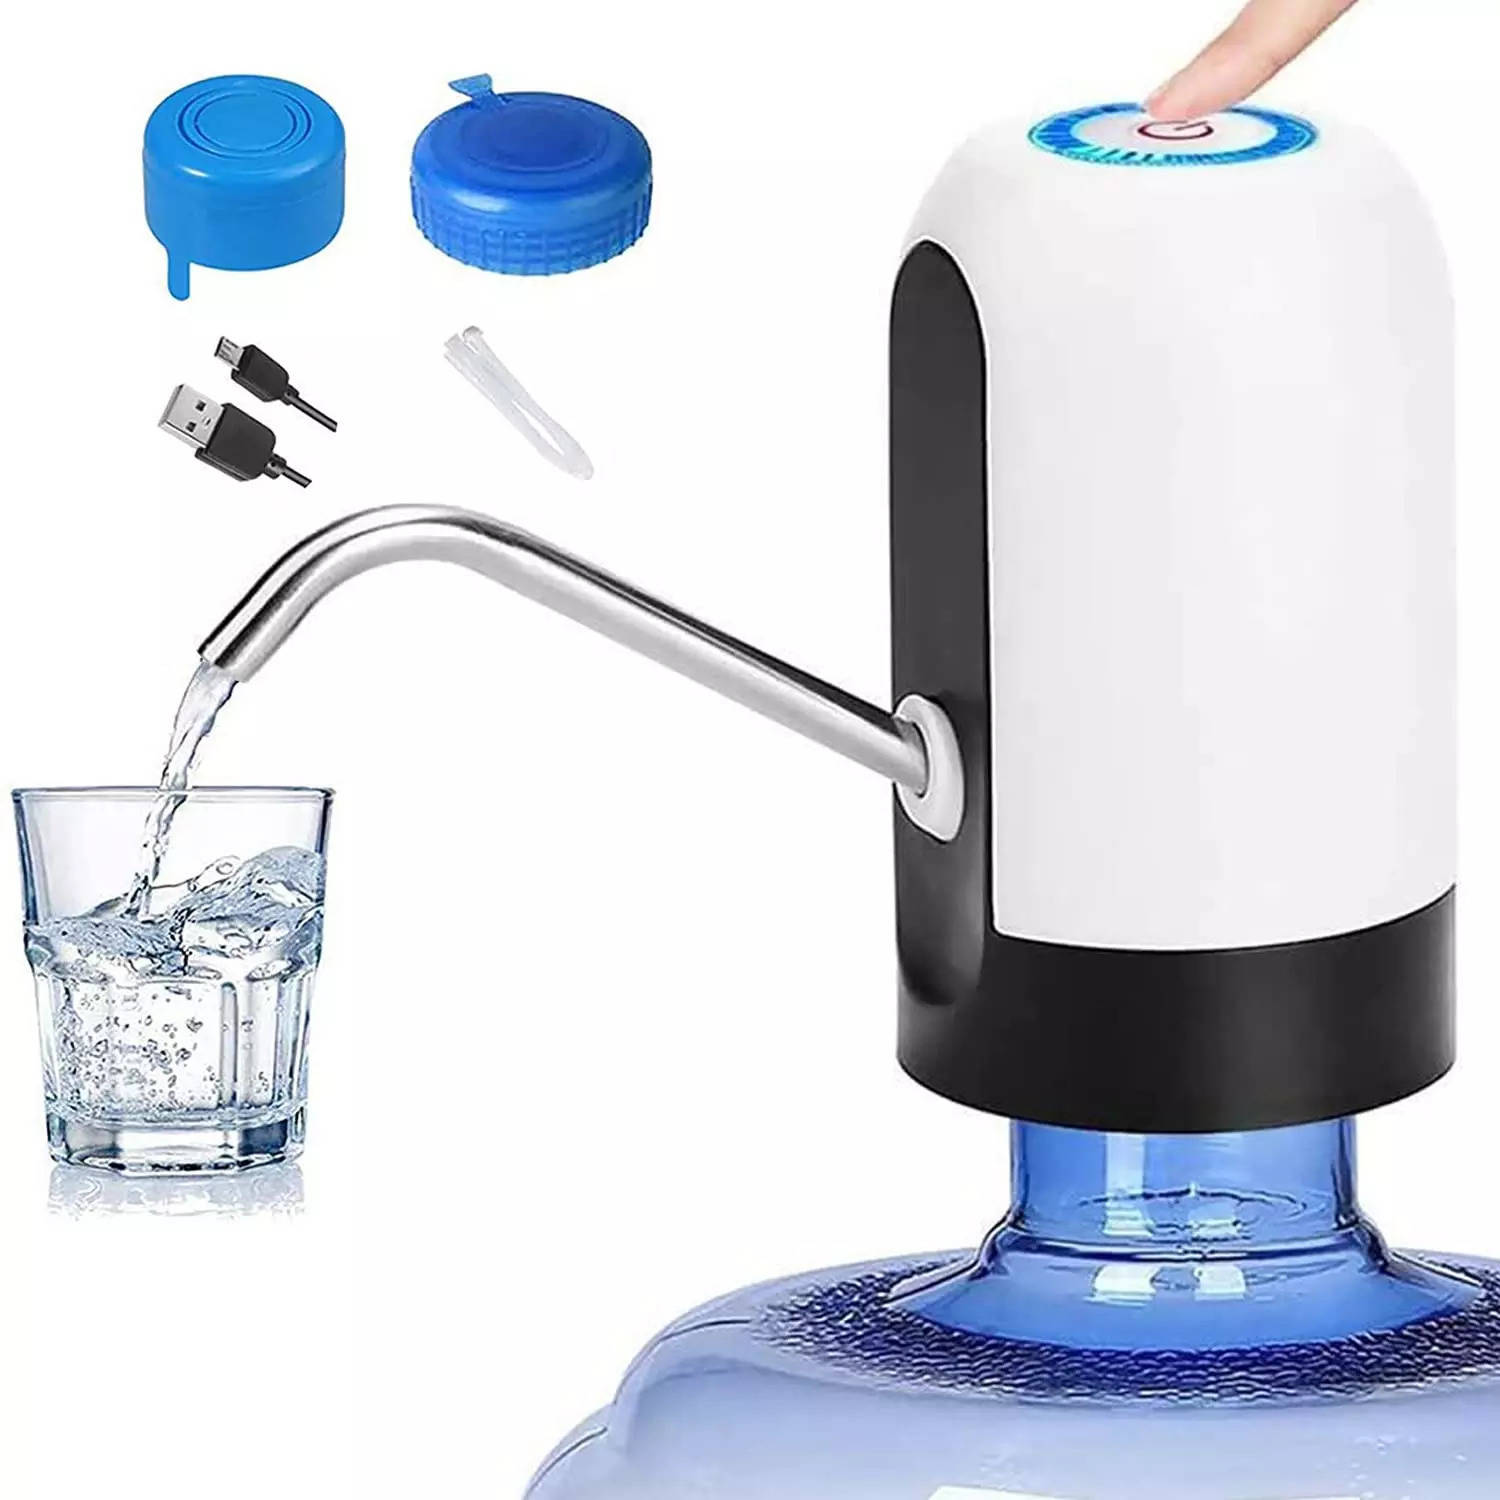 Check out these top water bottle pumps for convenient usage